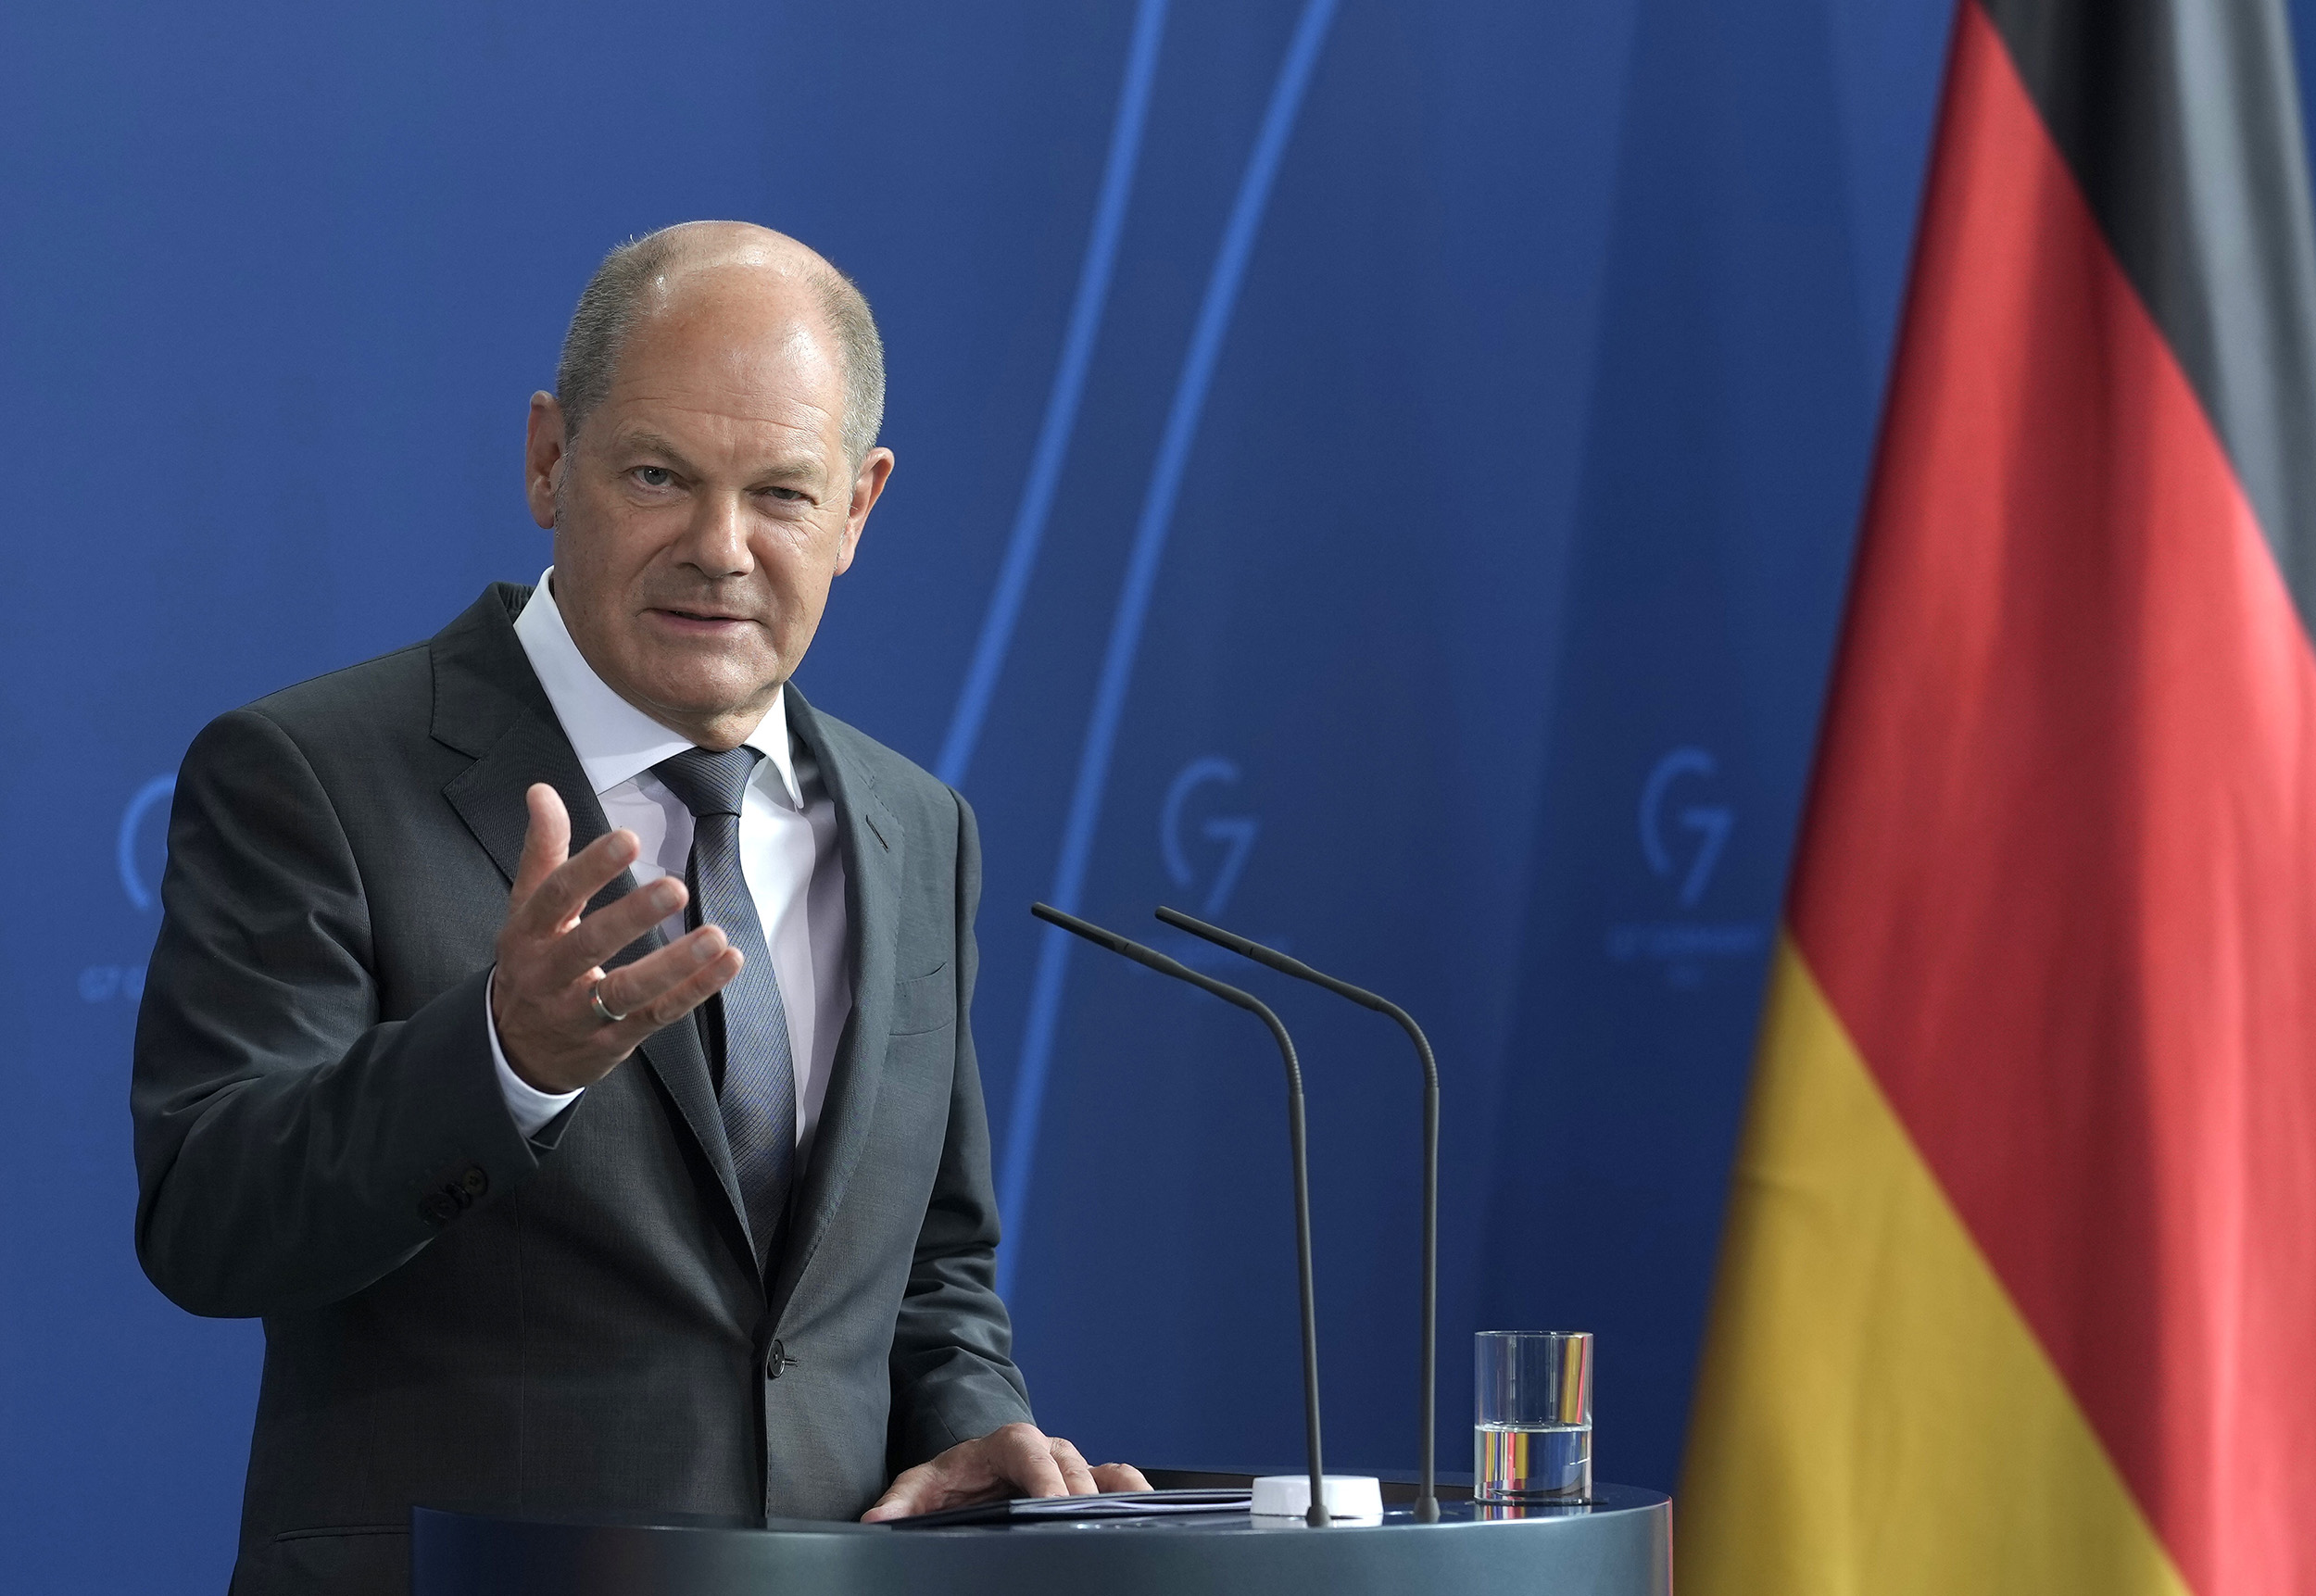 German Chancellor Olaf Scholz speaks during a press conference in Berlin, Germany, on July 22.